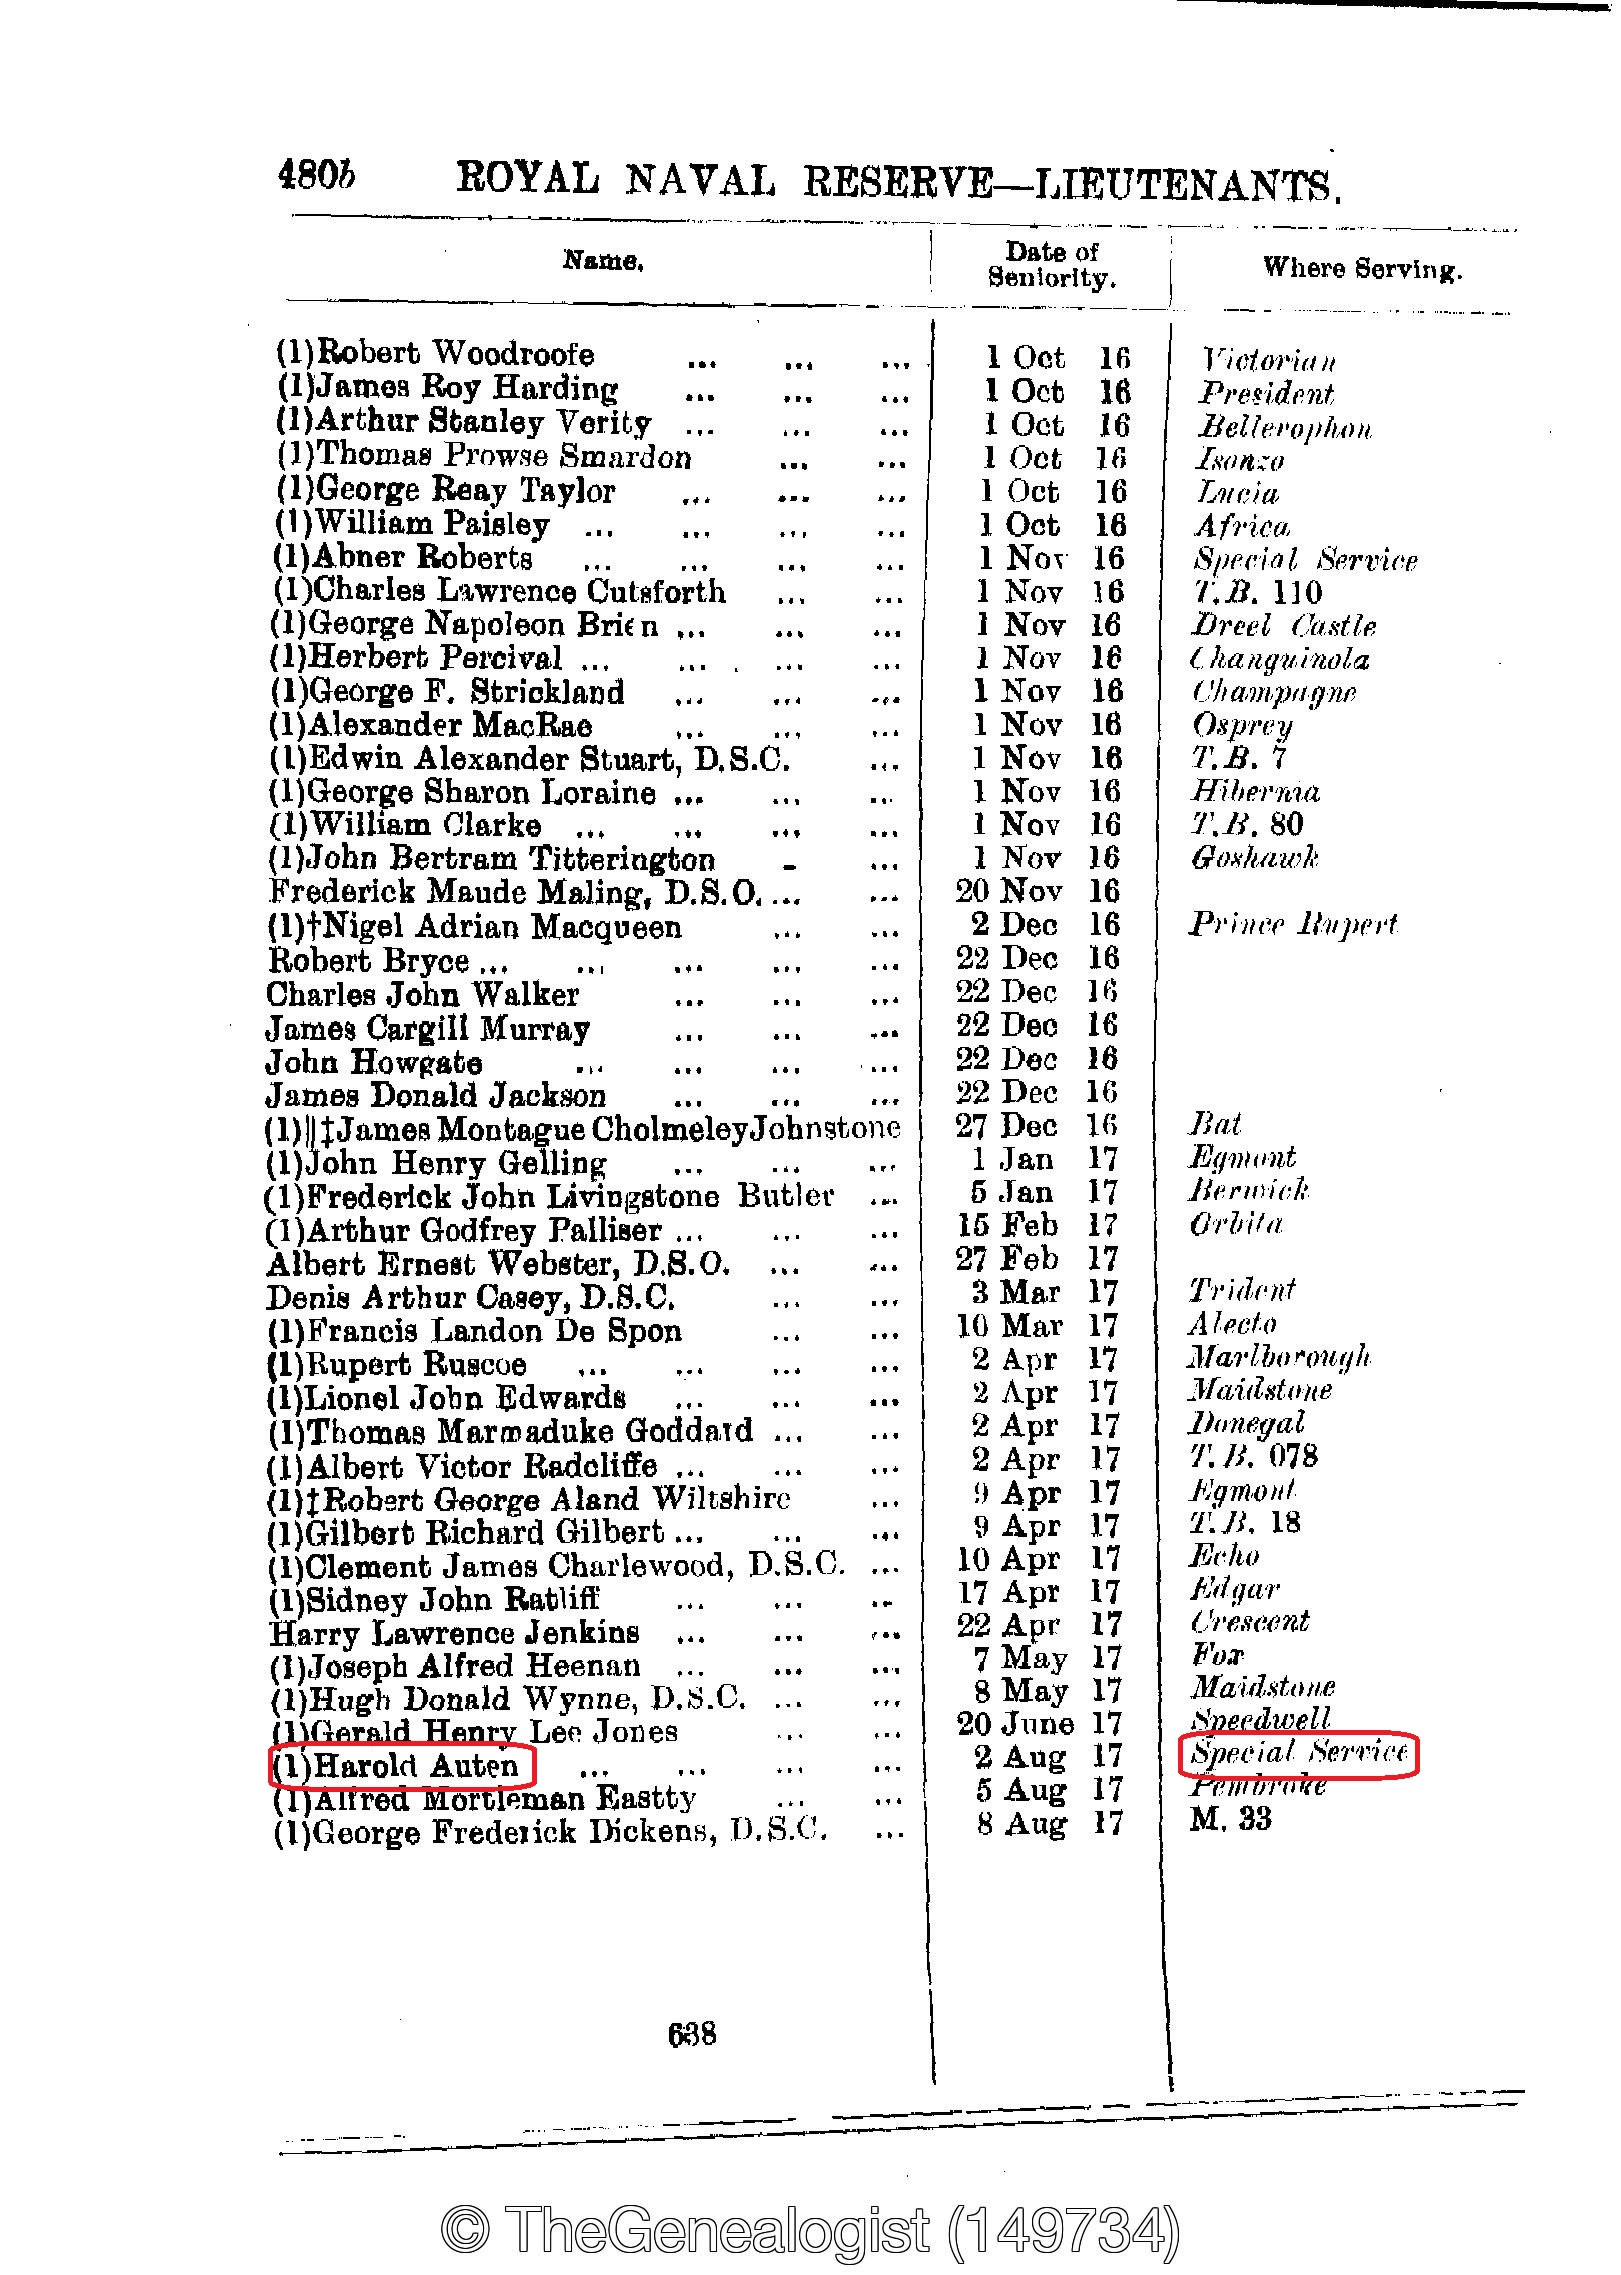 The Navy List 1917 is one of many to be found in TheGenealogist's Military Records